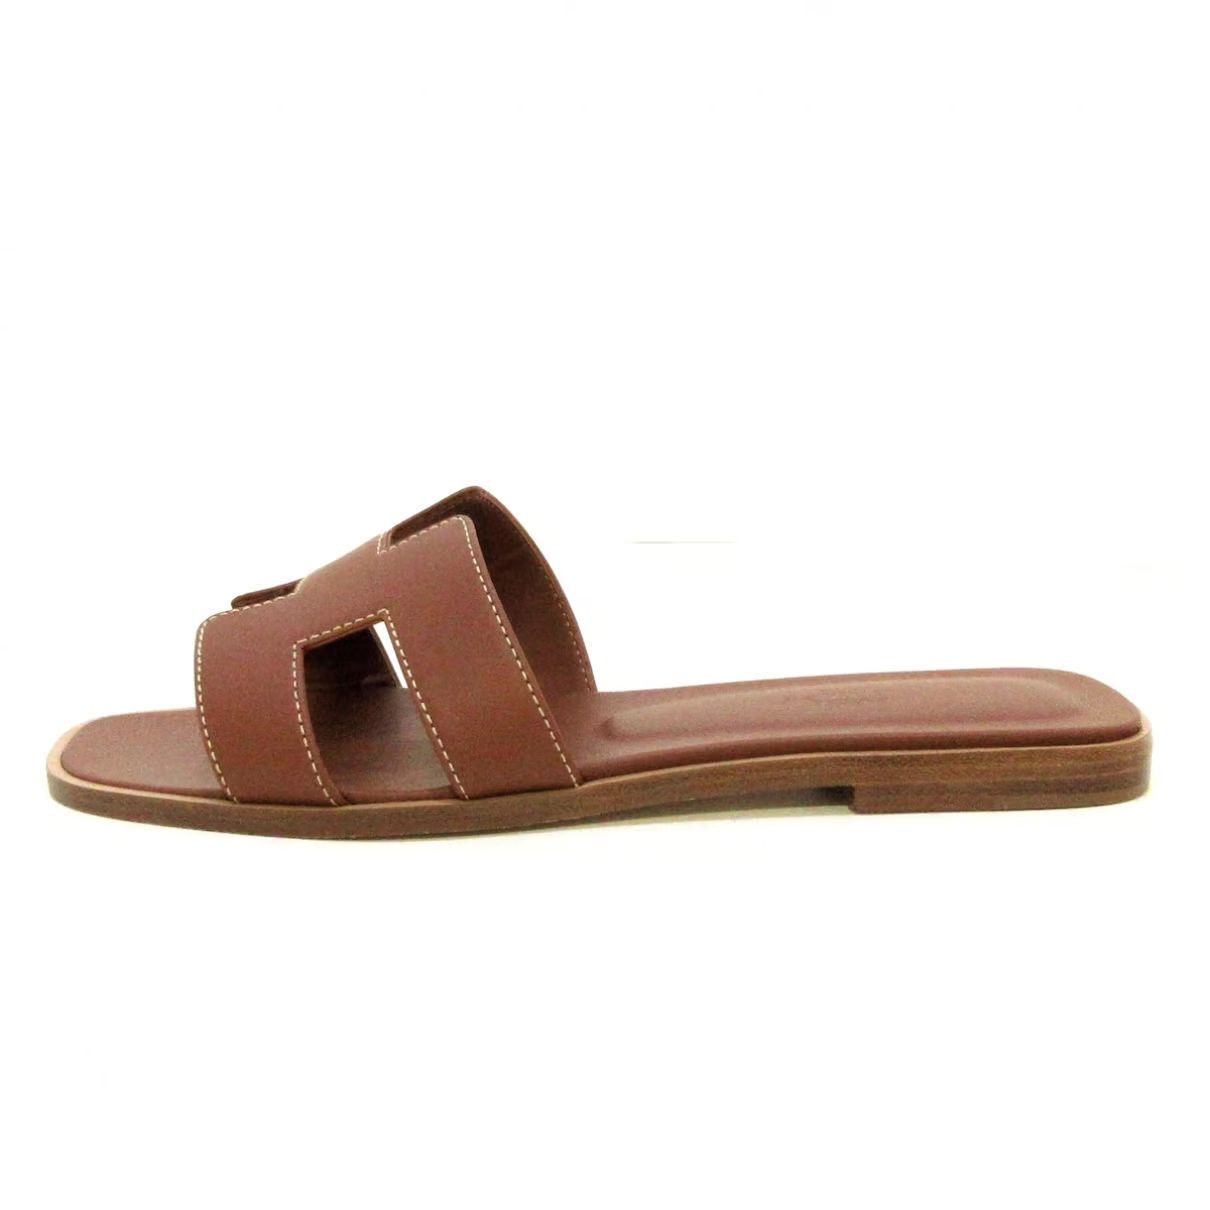 Hermès Oran Sandals for Women | Buy or Sell Designer women's shoes! - Vestiaire Collective | Vestiaire Collective (Global)